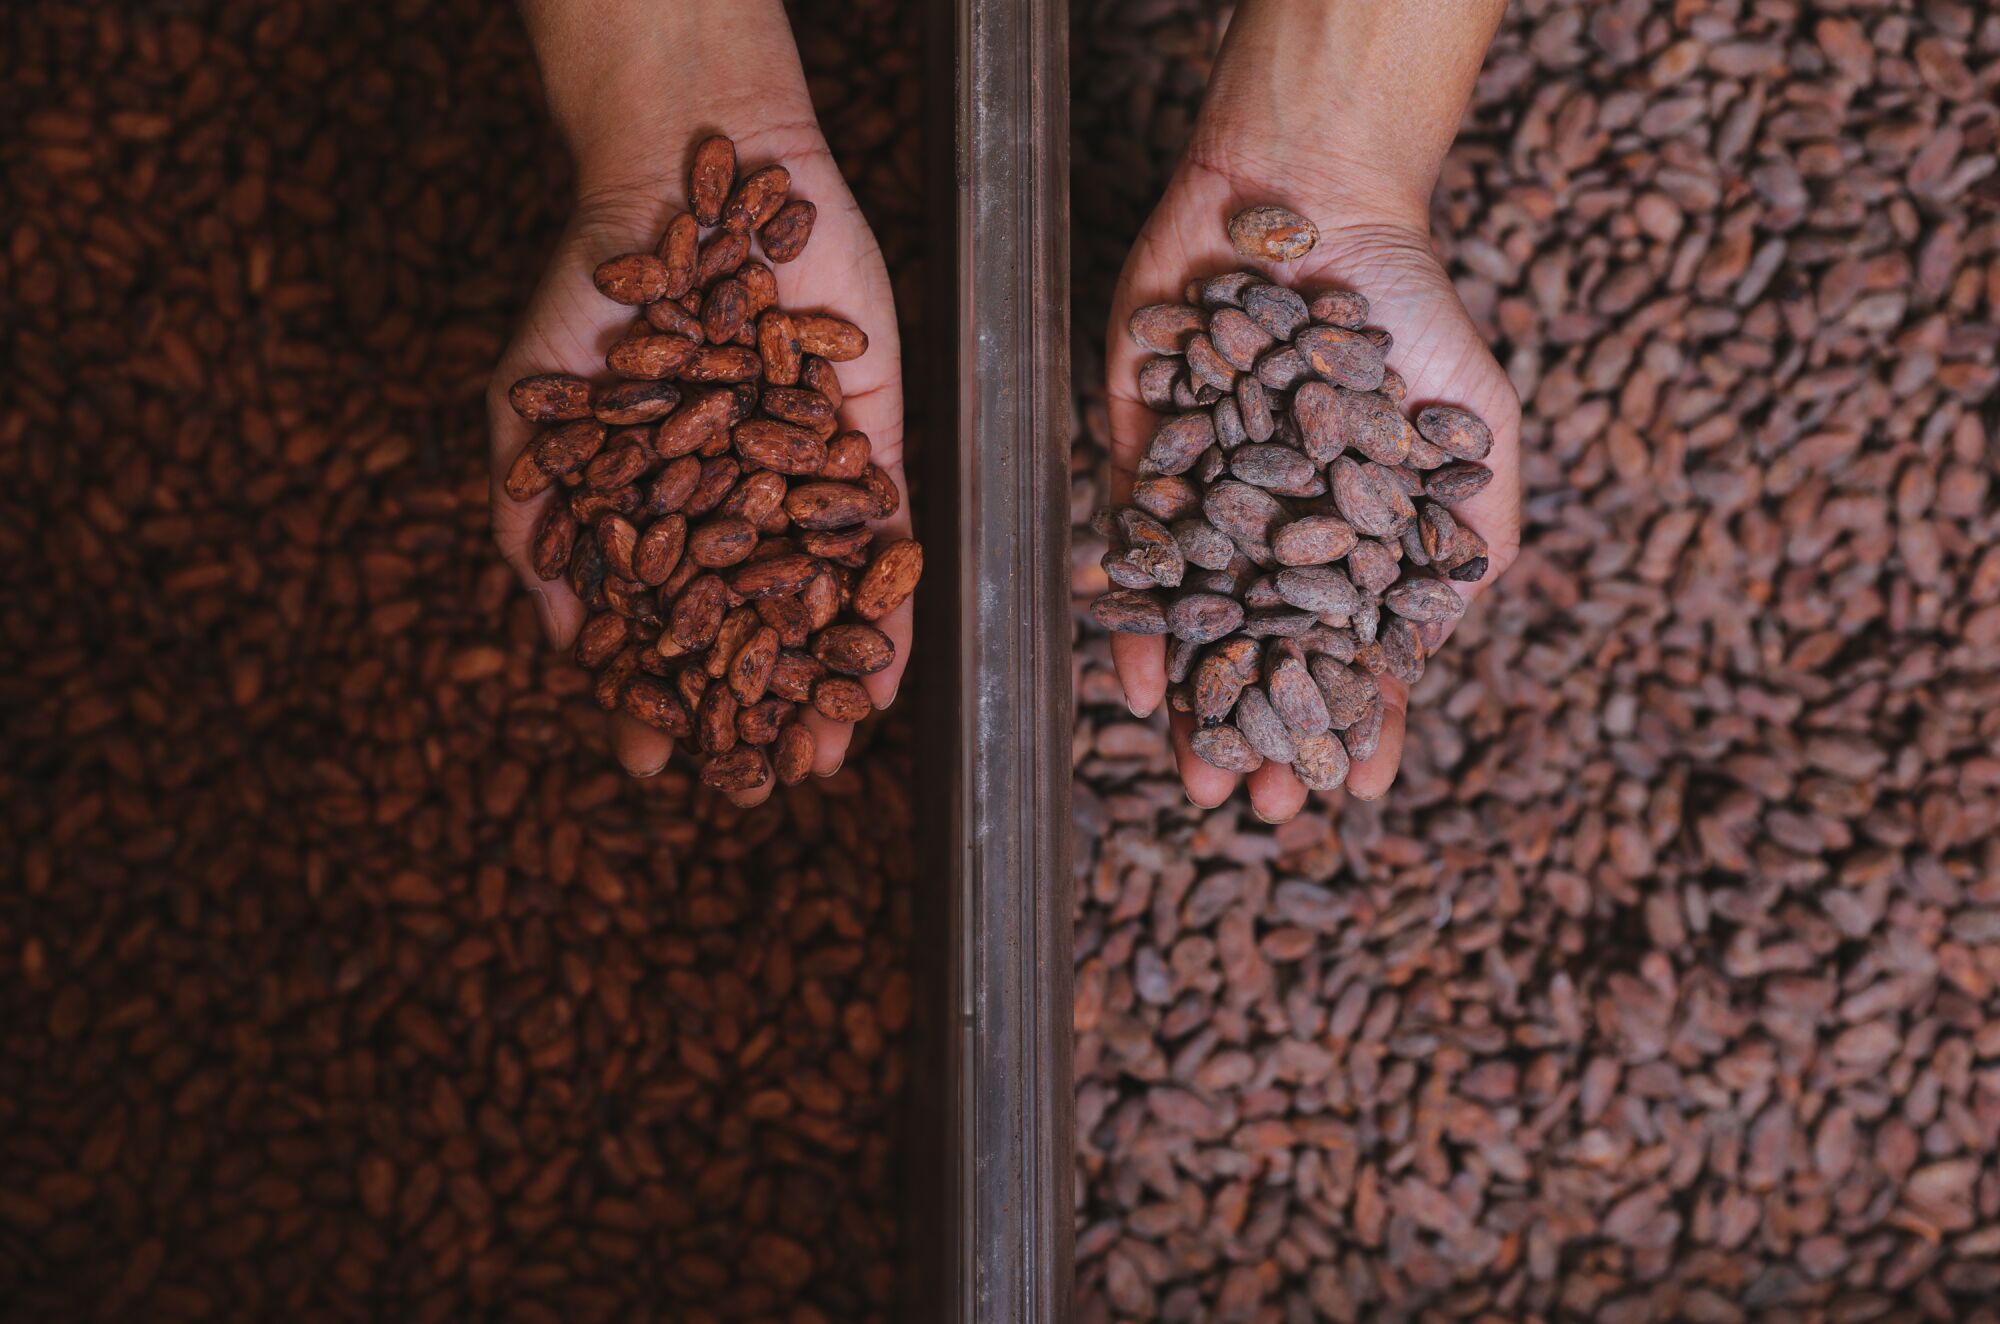 Hands holding up coffee beans from two side-by-side bins